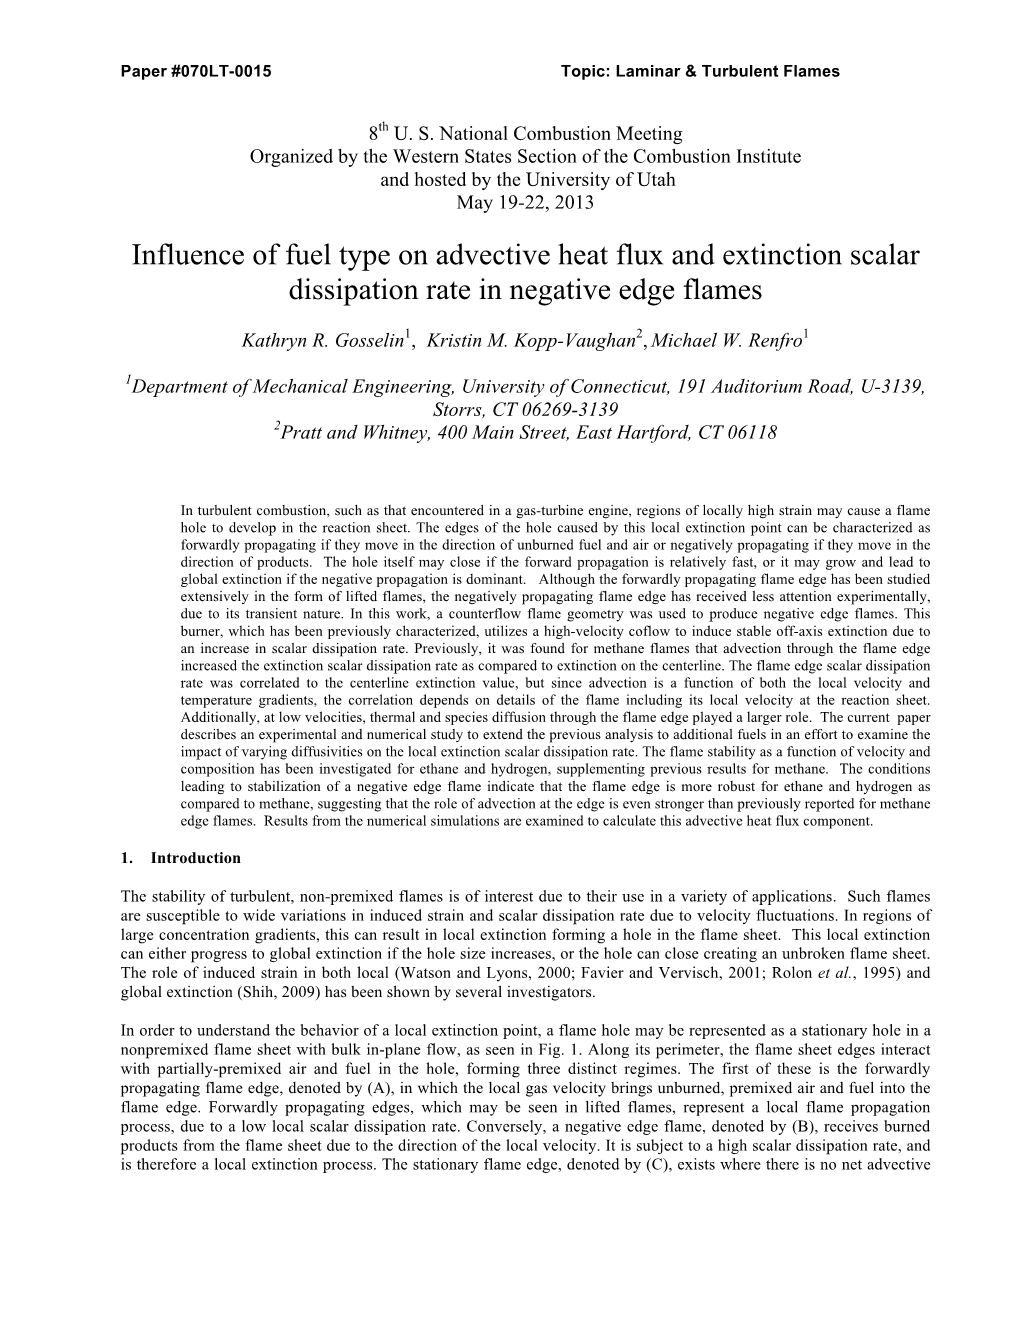 Influence of Fuel Type on Advective Heat Flux and Extinction Scalar Dissipation Rate in Negative Edge Flames